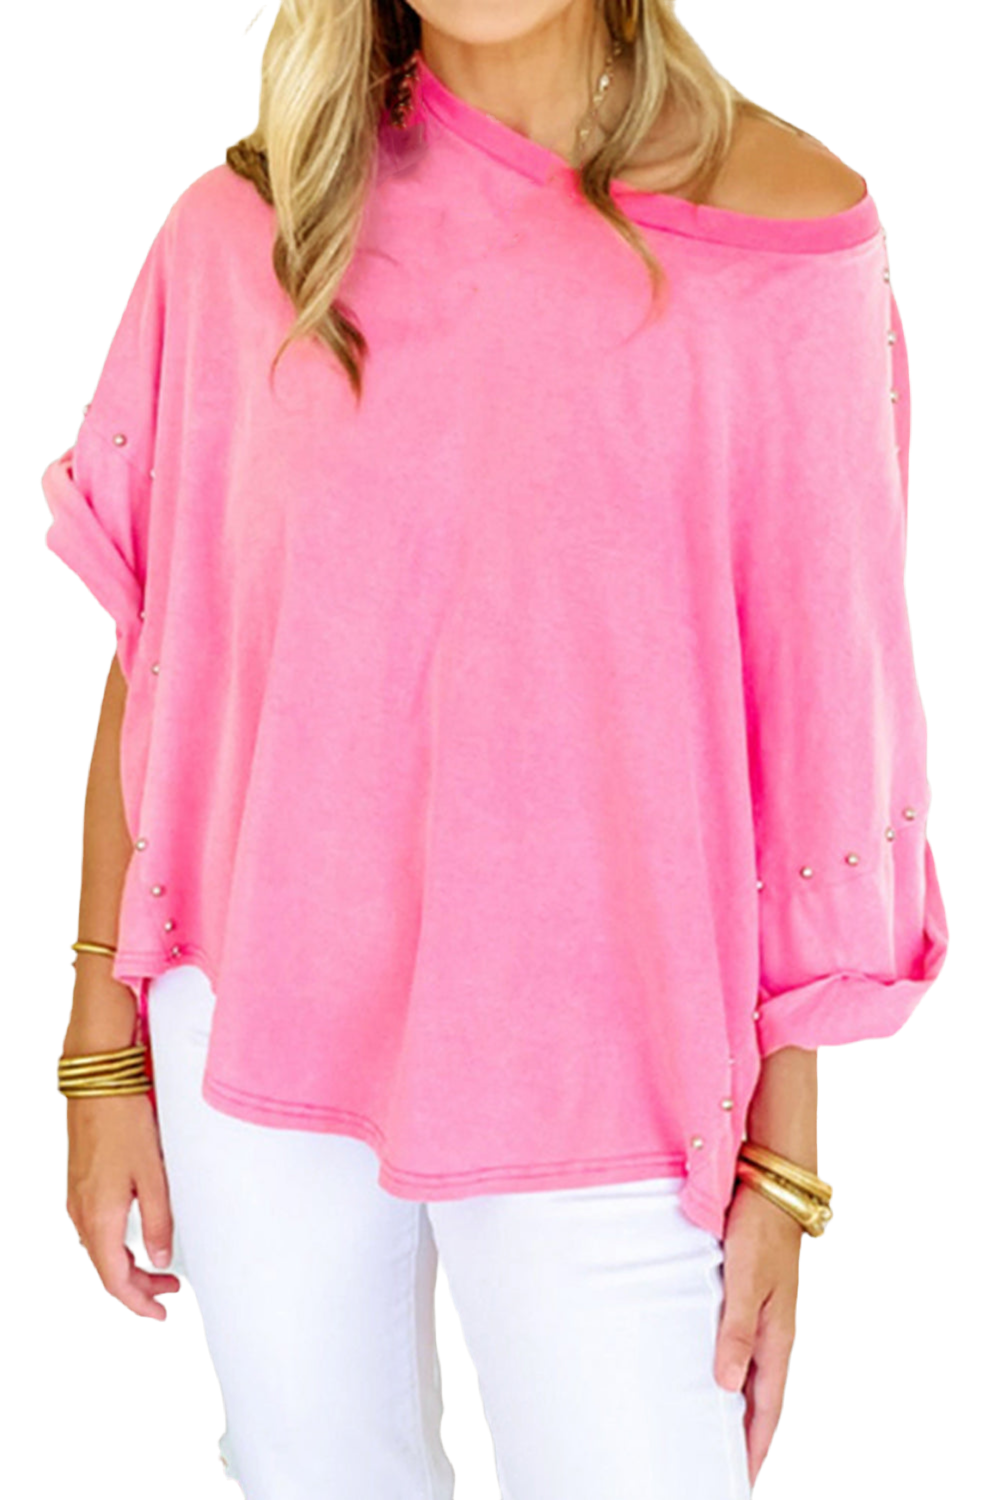 Veronica Studded Oversized Top